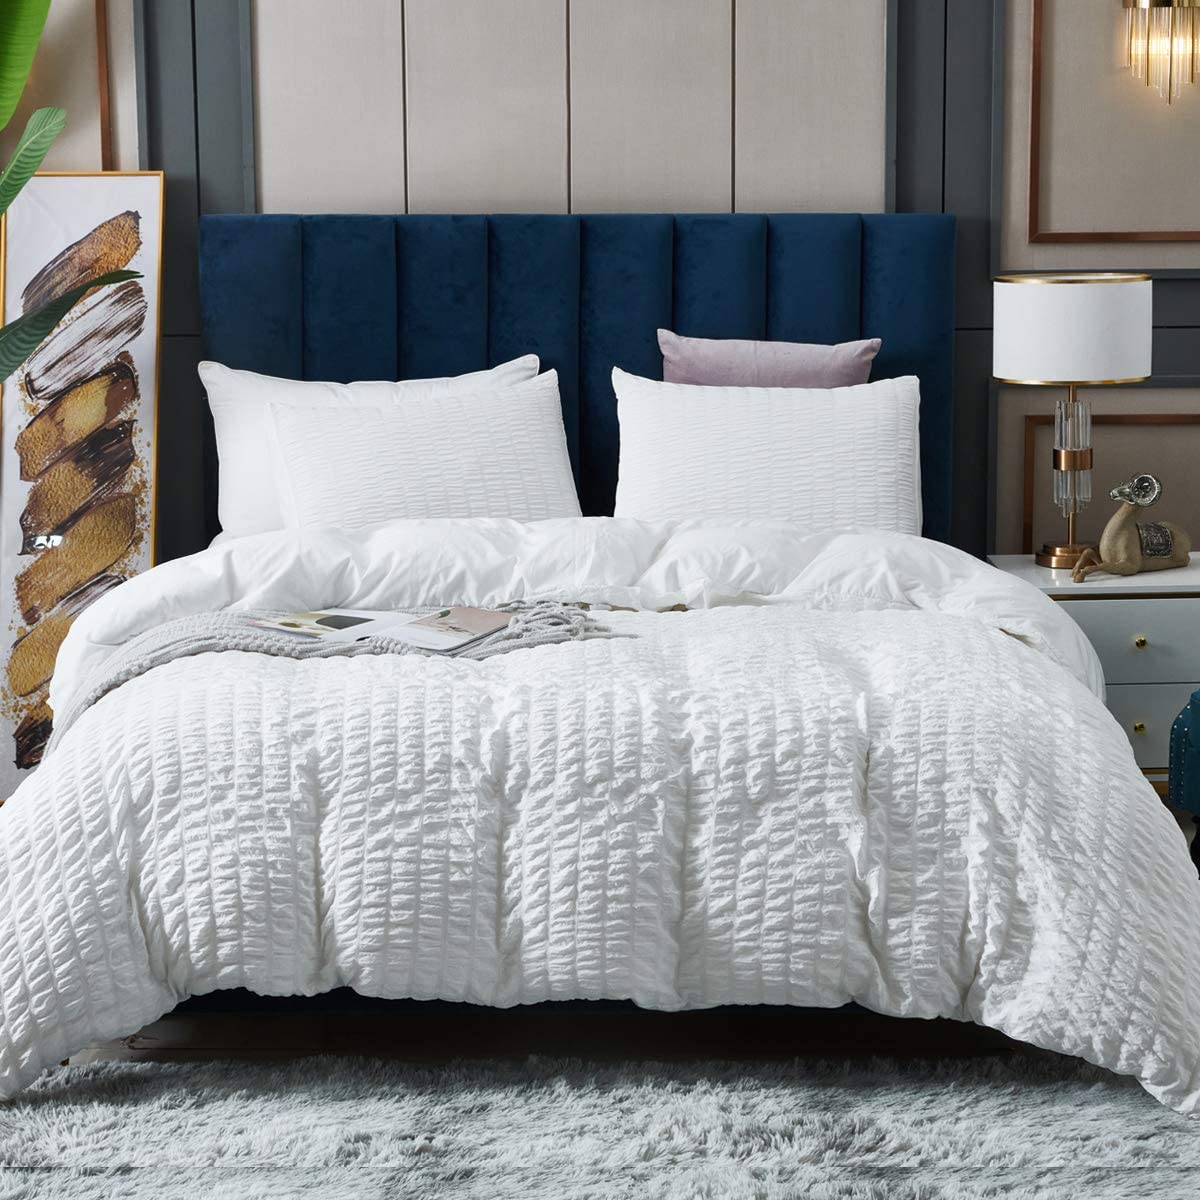 Price:$35.99  Seersucker Duvet Cover King Size, 100% Soft Washed Microfiber 3 Piece Duvet Cover Set, Textured Bedding Comforter Cover Sets Comfortable with Zipper Closure & Corner Ties, 104x90 inches : Home & Kitchen